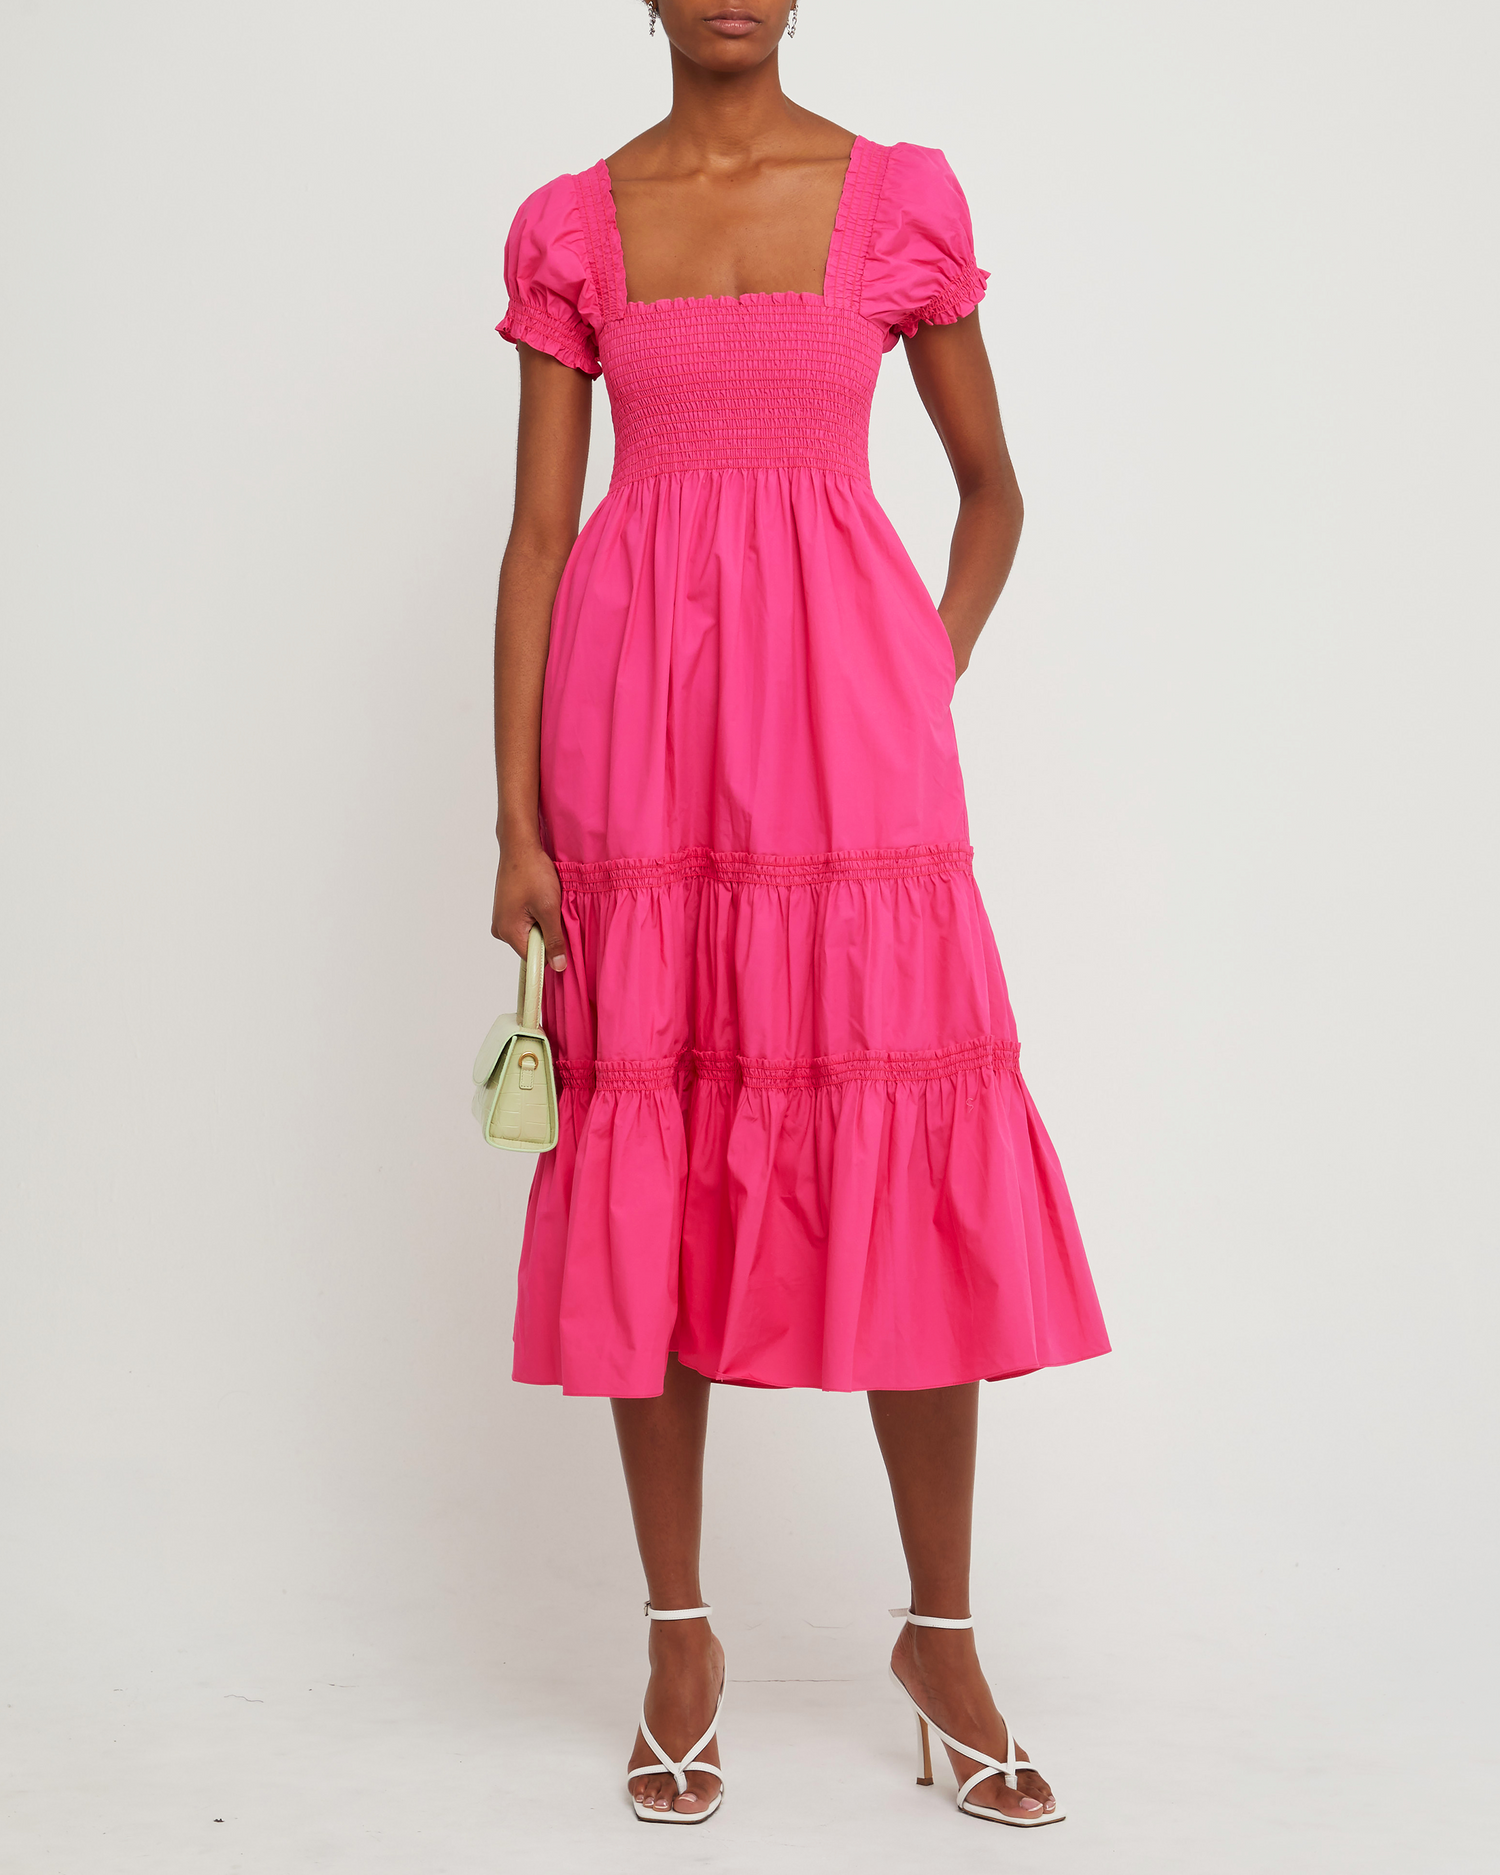 Fourth image of Square Neck Smocked Maxi Dress, a pink maxi dress, smocked, puff sleeves, short sleeves